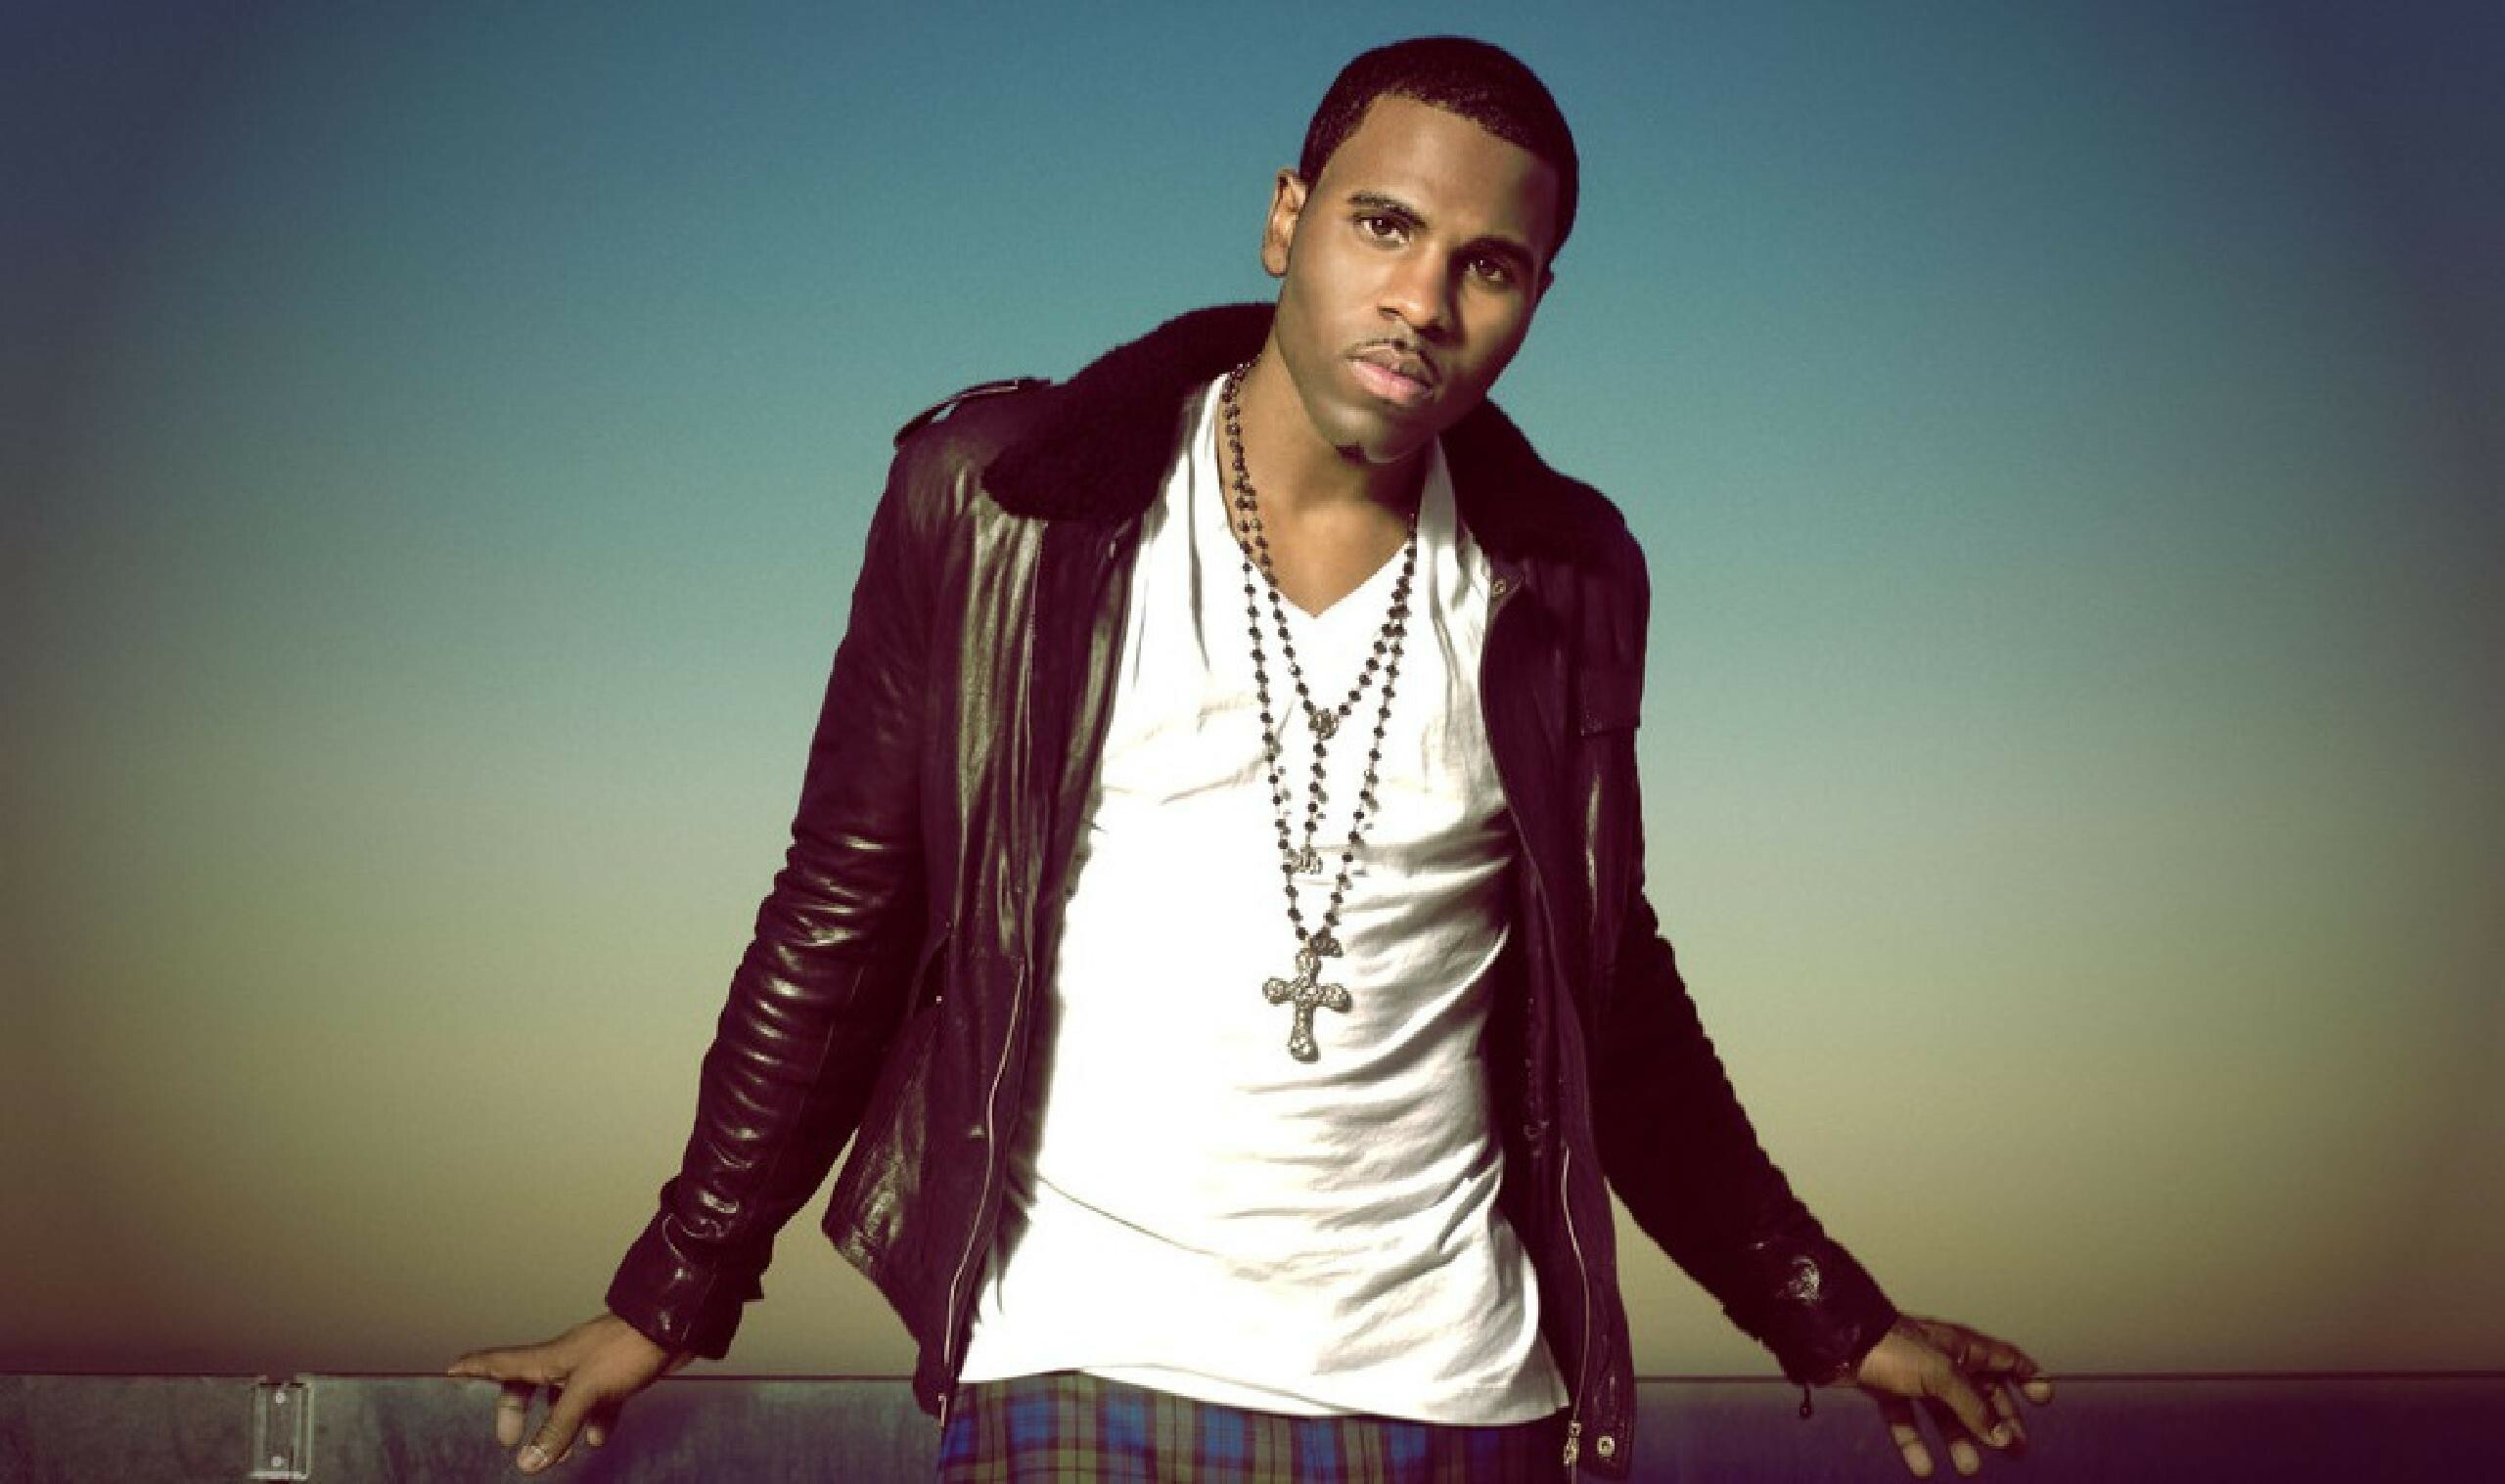 Jason Derulo: "That's My Shhh" was released for digital download on August 26, 2011. 2560x1520 HD Wallpaper.